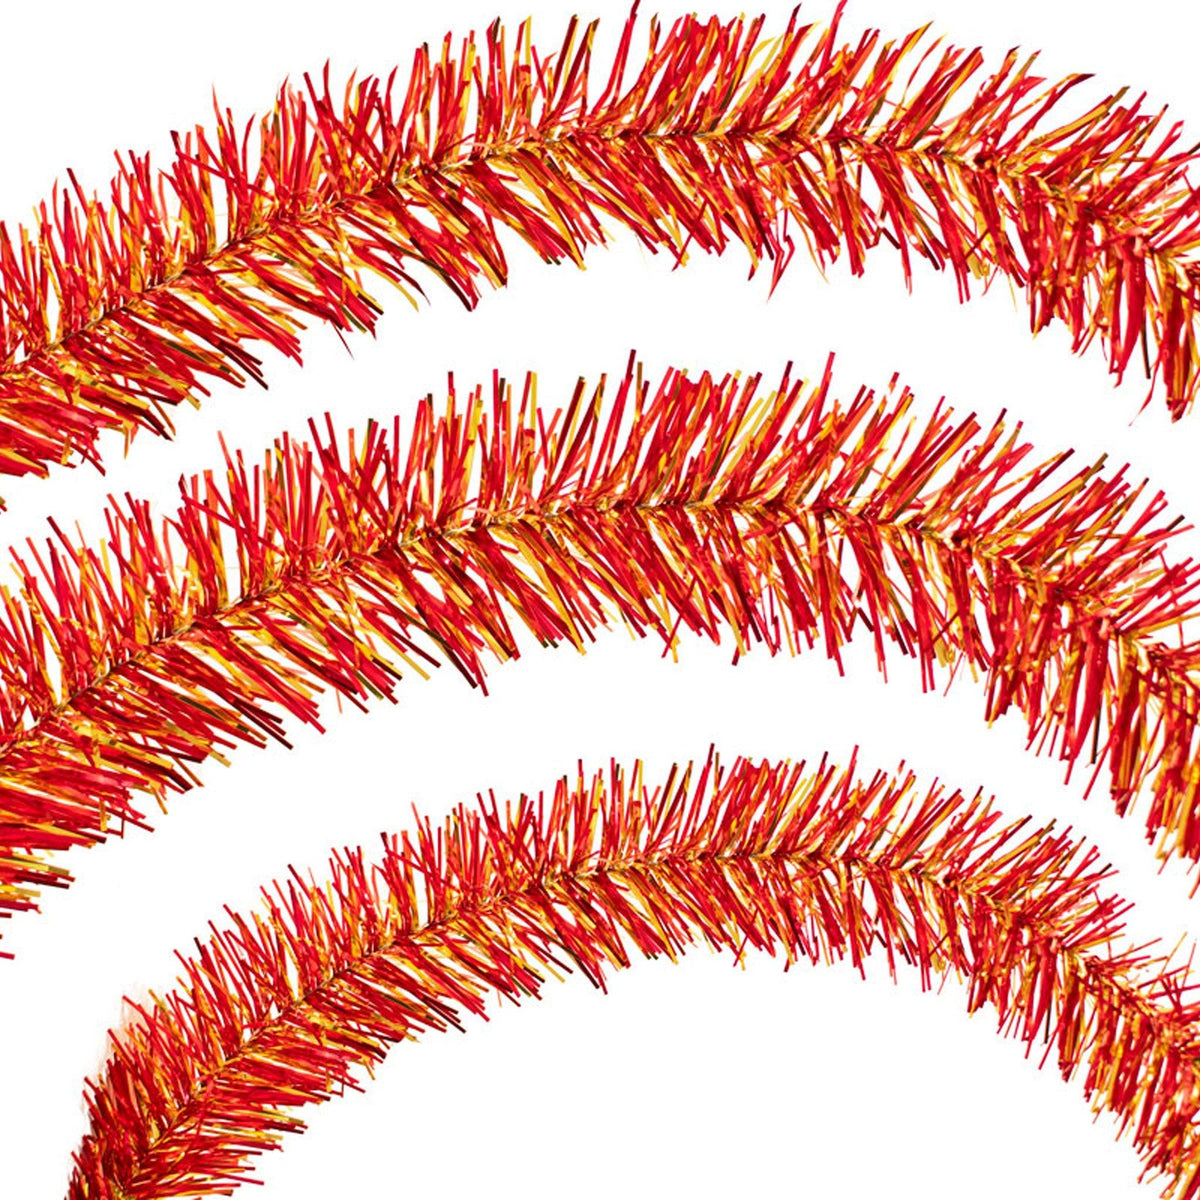 Lee Display's brand new 25ft Shiny Red and Gold Tinsel Garlands and Fringe Embellishments on sale now at leedisplay.com